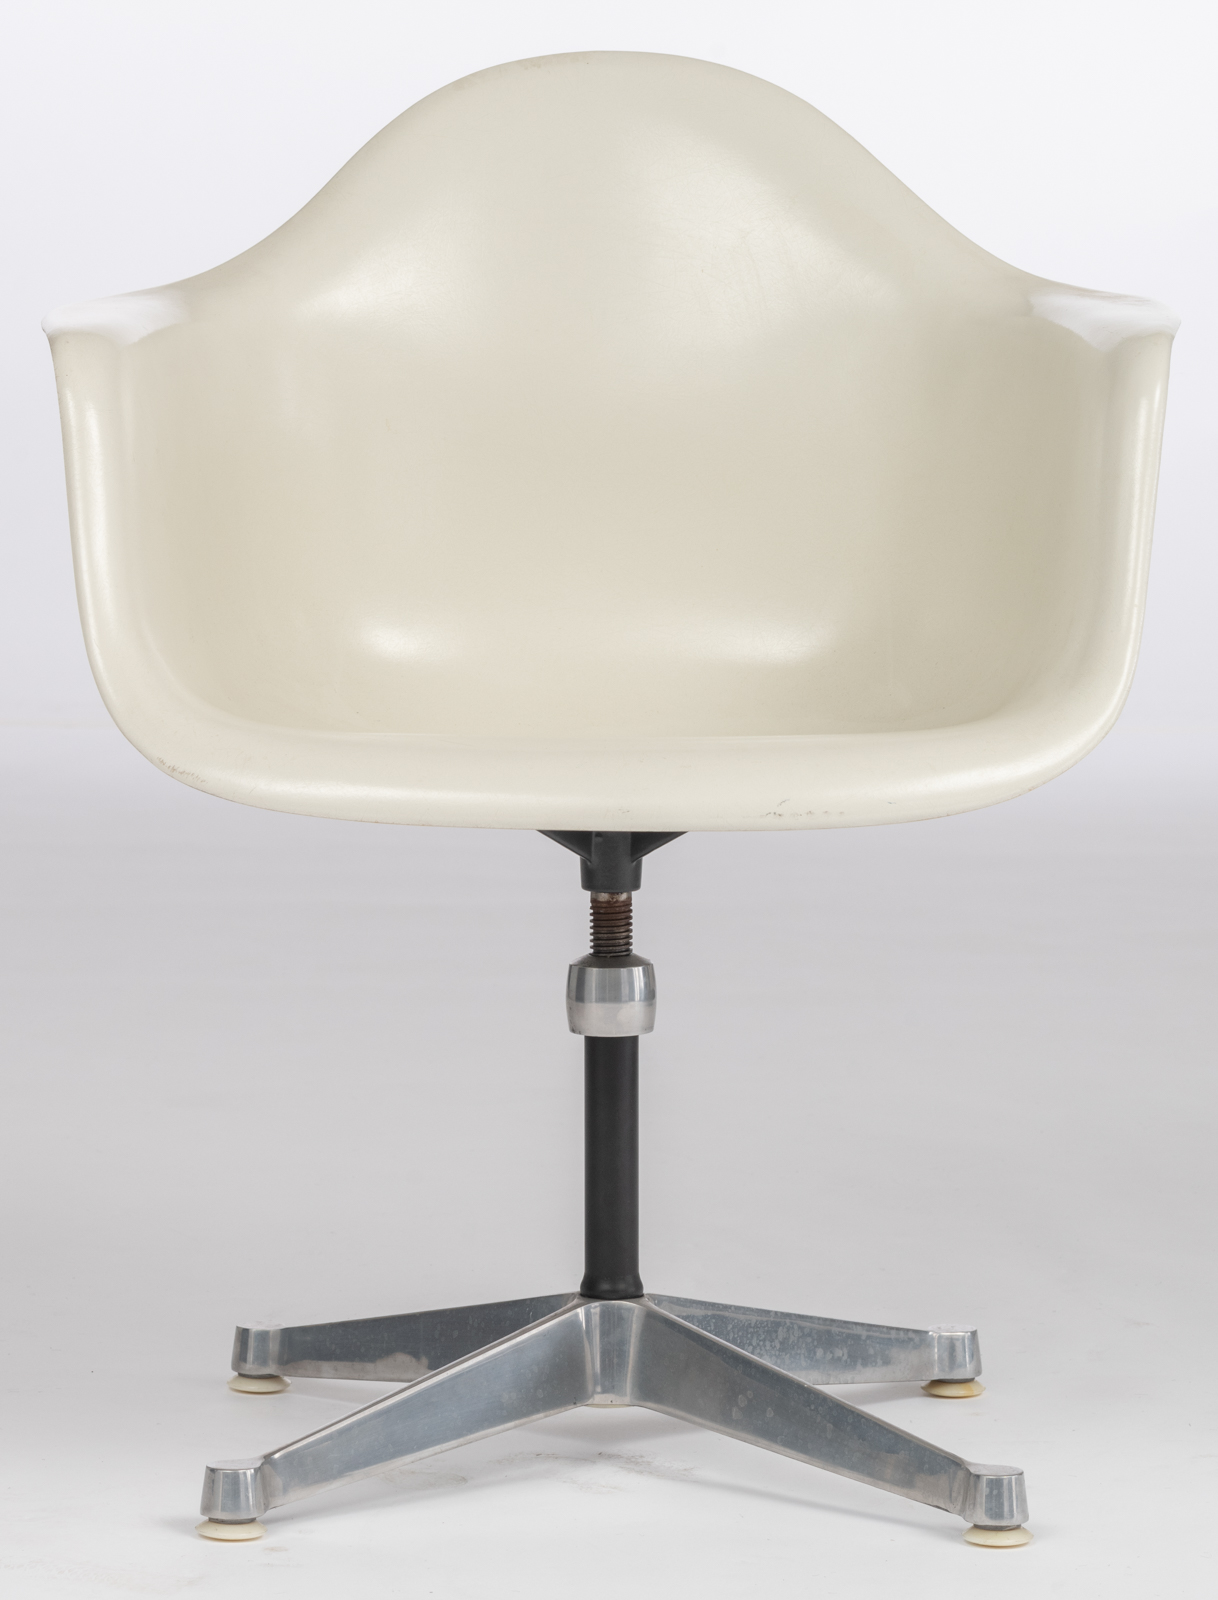 A white fibreglass shell 'PAC' armchair, design by Eames for Herman Miller, H 77,5 - W 63 cm - Image 5 of 10